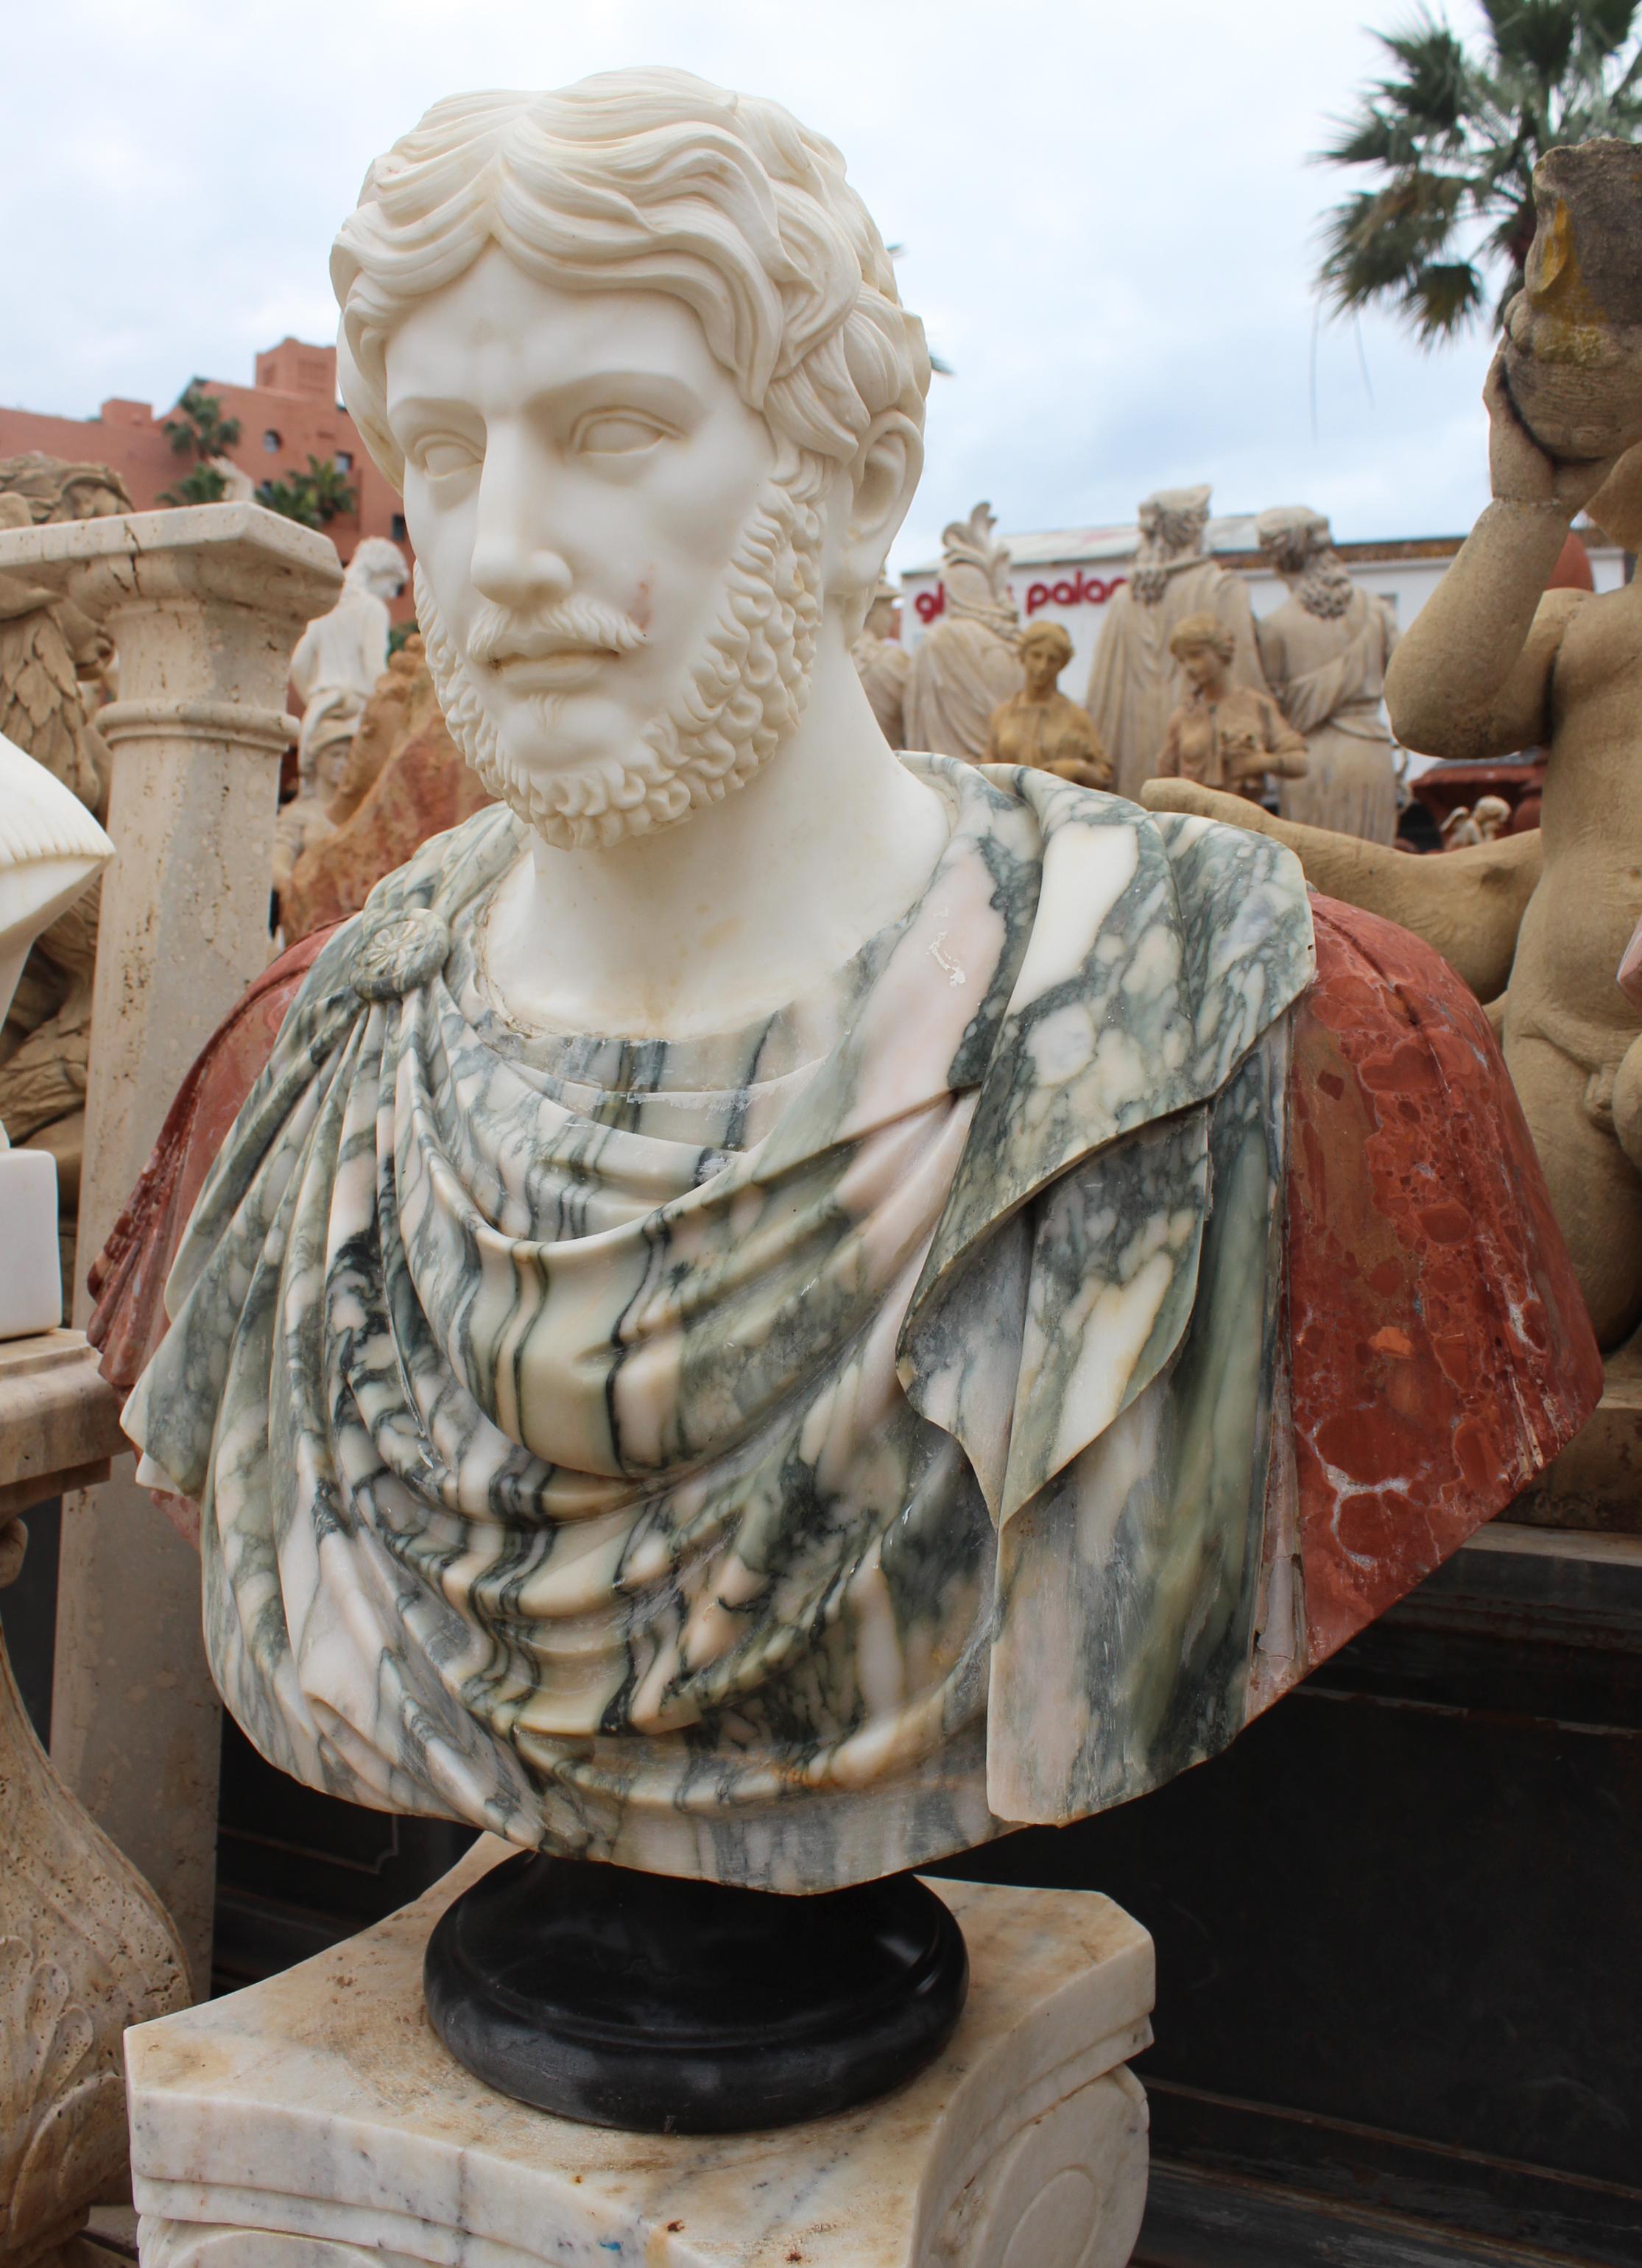 1990s bust of a Roman, hand carved by craftsmen using Carrara white marble for the head, Arabescato for the main toga body and Alicante red for the arms, where the veining provide realist texture and movement to the cloth. Simple round base in